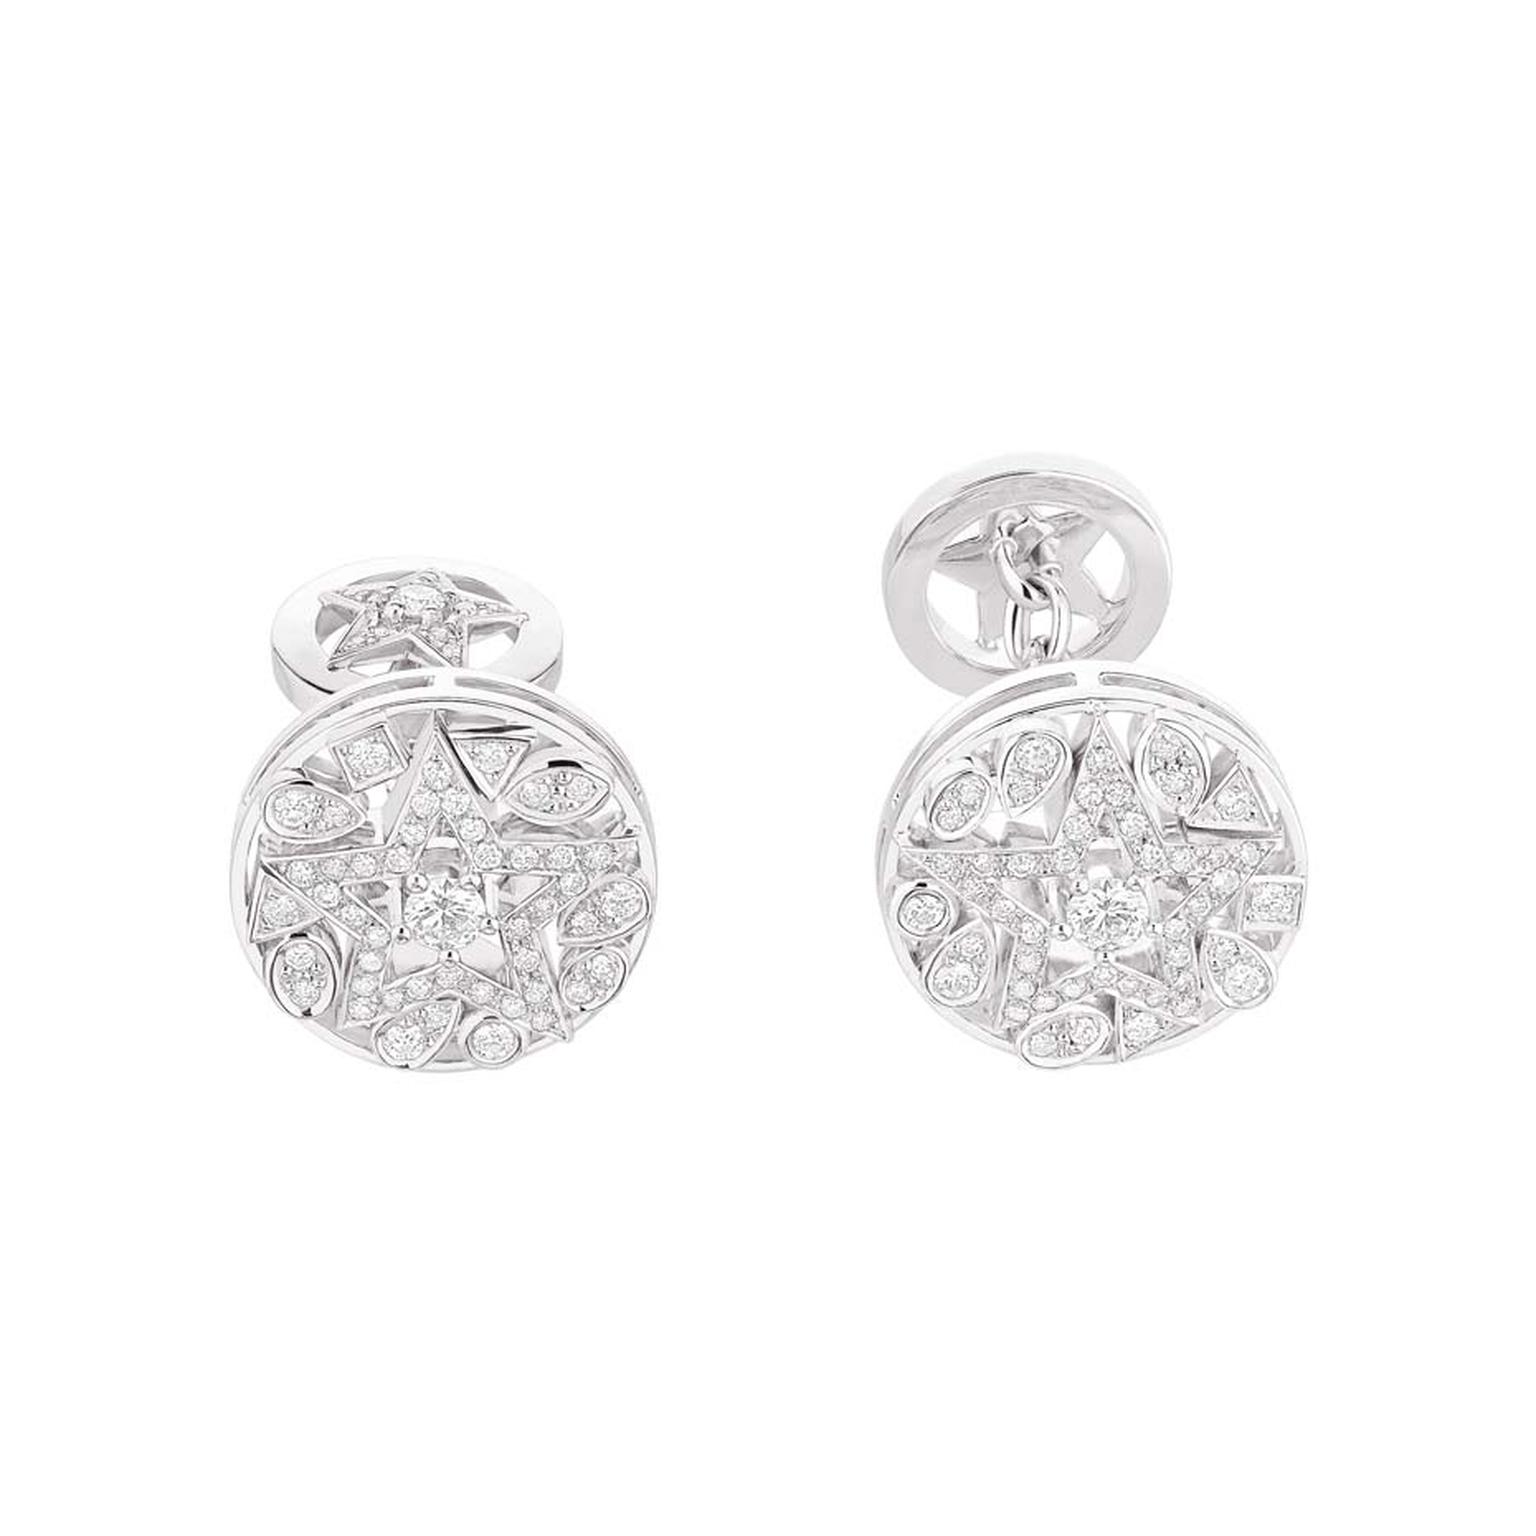 A sparkling Christmas gift for men: Chanel Étoile Filante white gold cufflinks with 116 brilliant-cut diamonds.